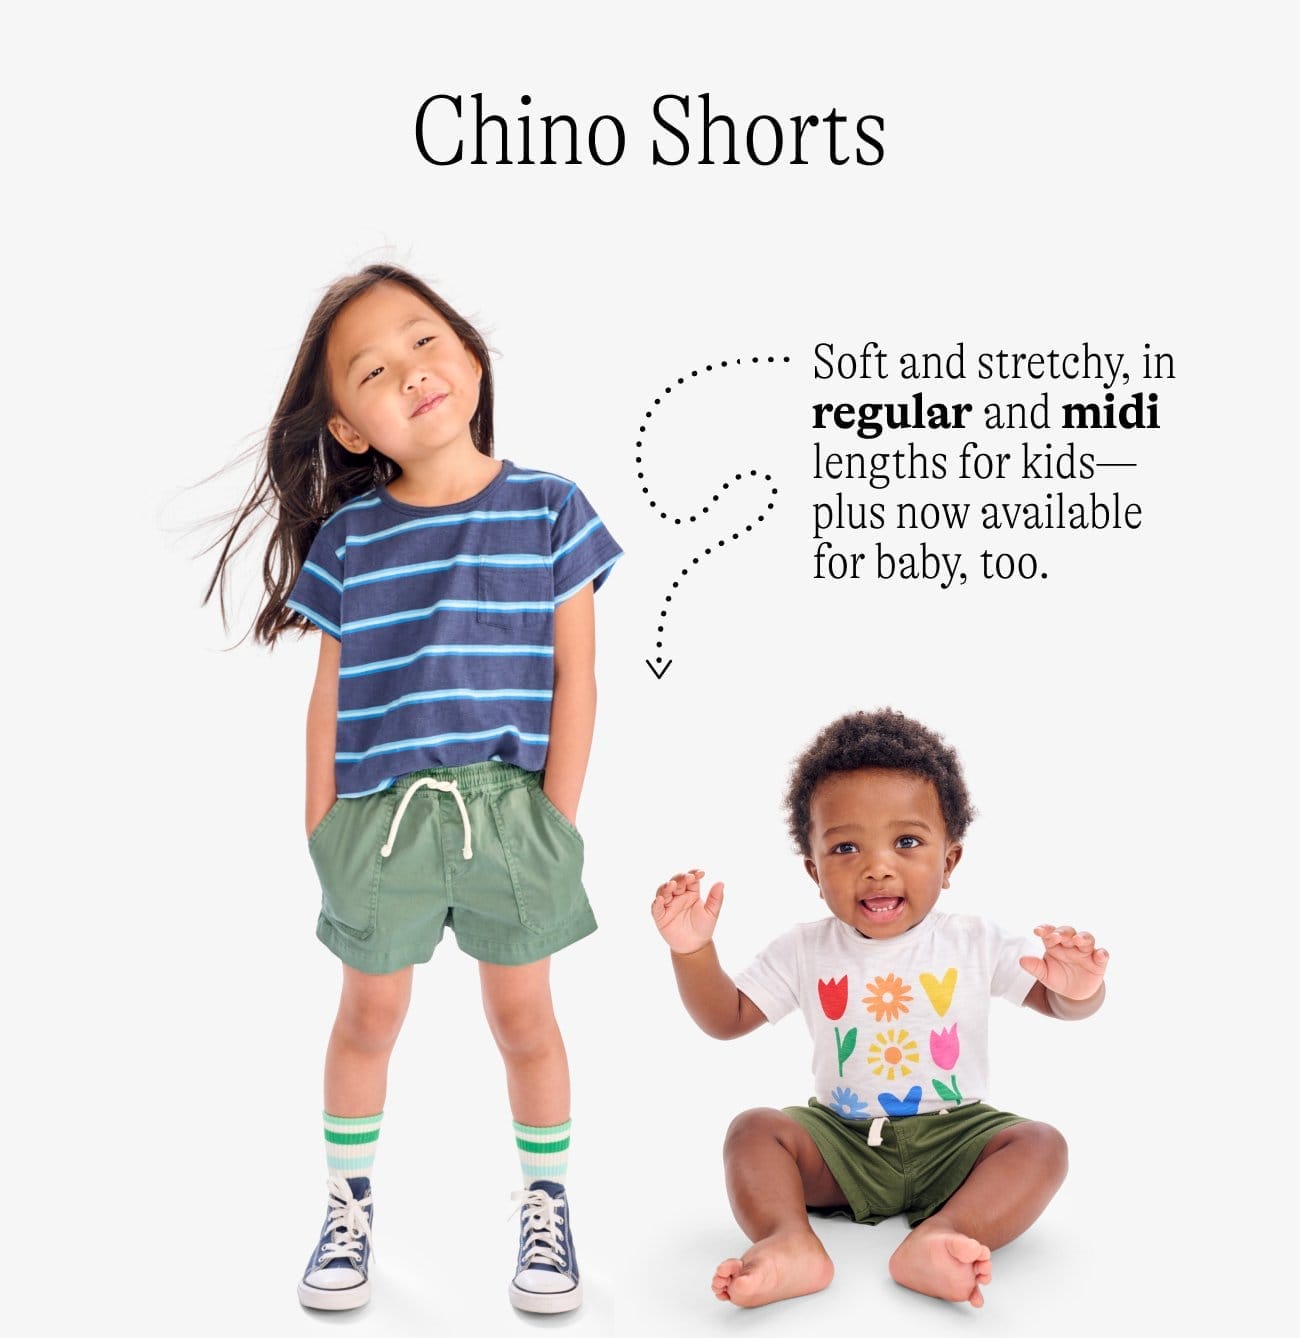 Chino Shorts: Soft and stretchy, in regular and midi lengths for kids—plus now available for baby, too.